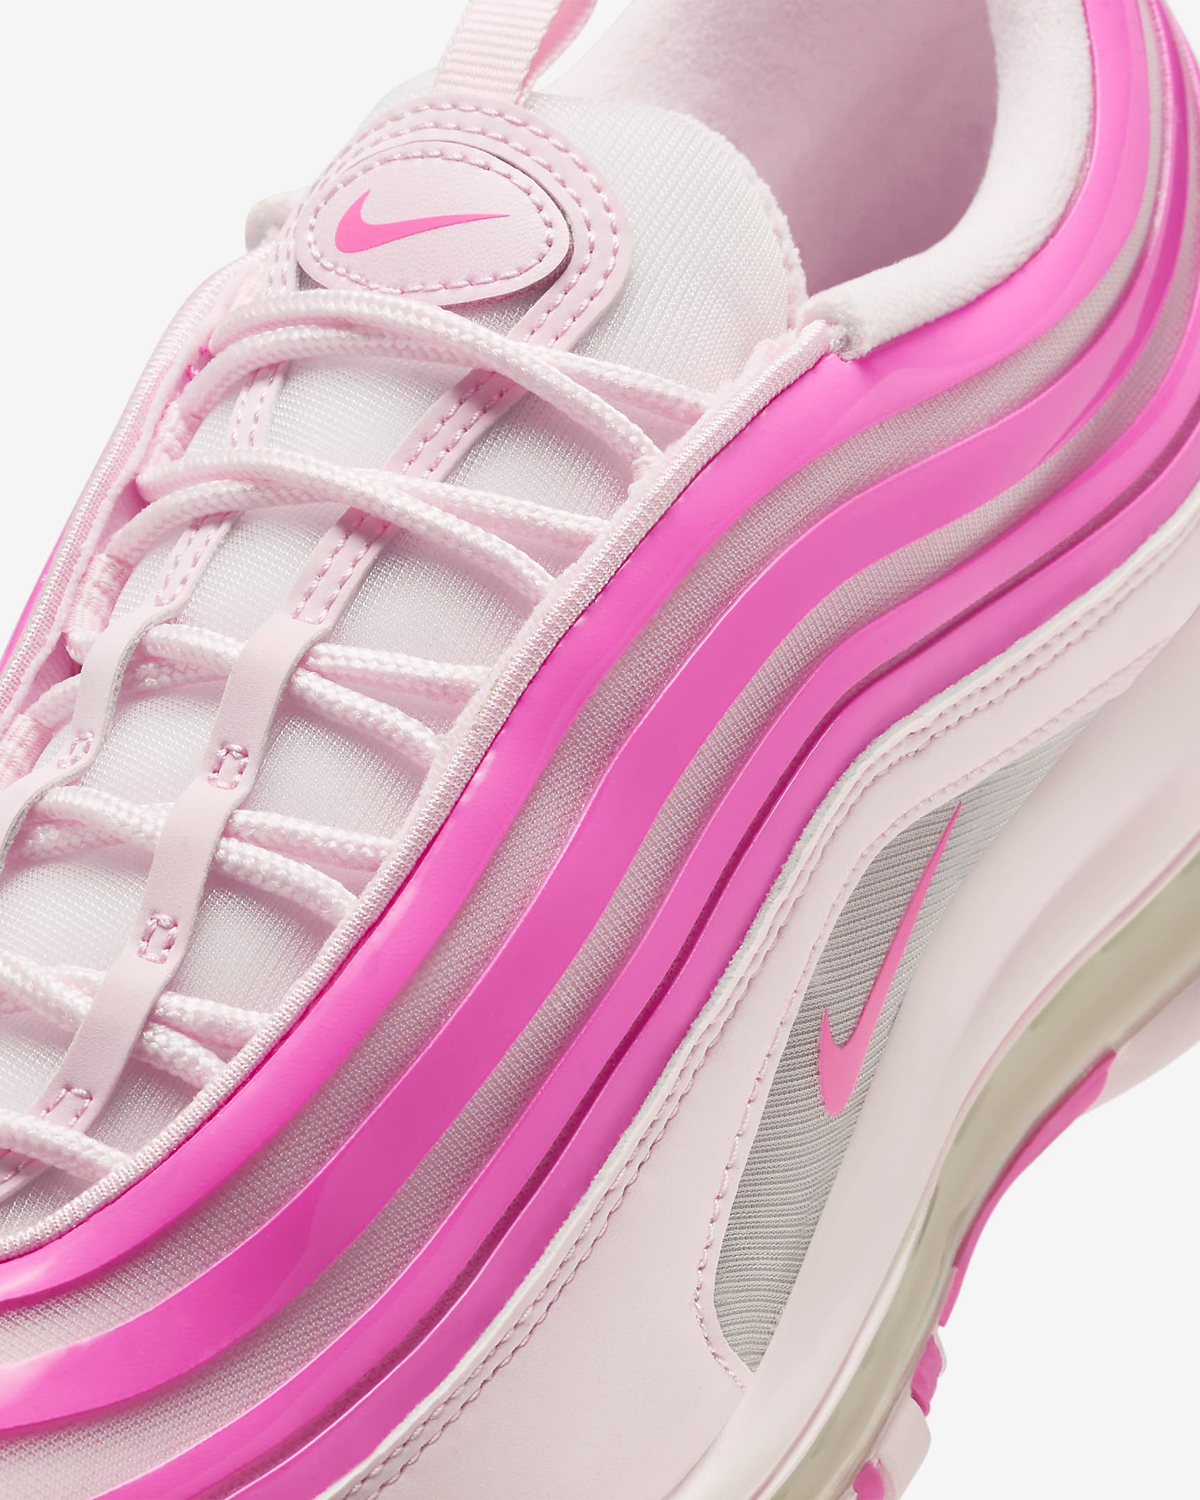 Nike-Air-Max-97-Pink-Foam-Playful-Pink-Release-Date-7